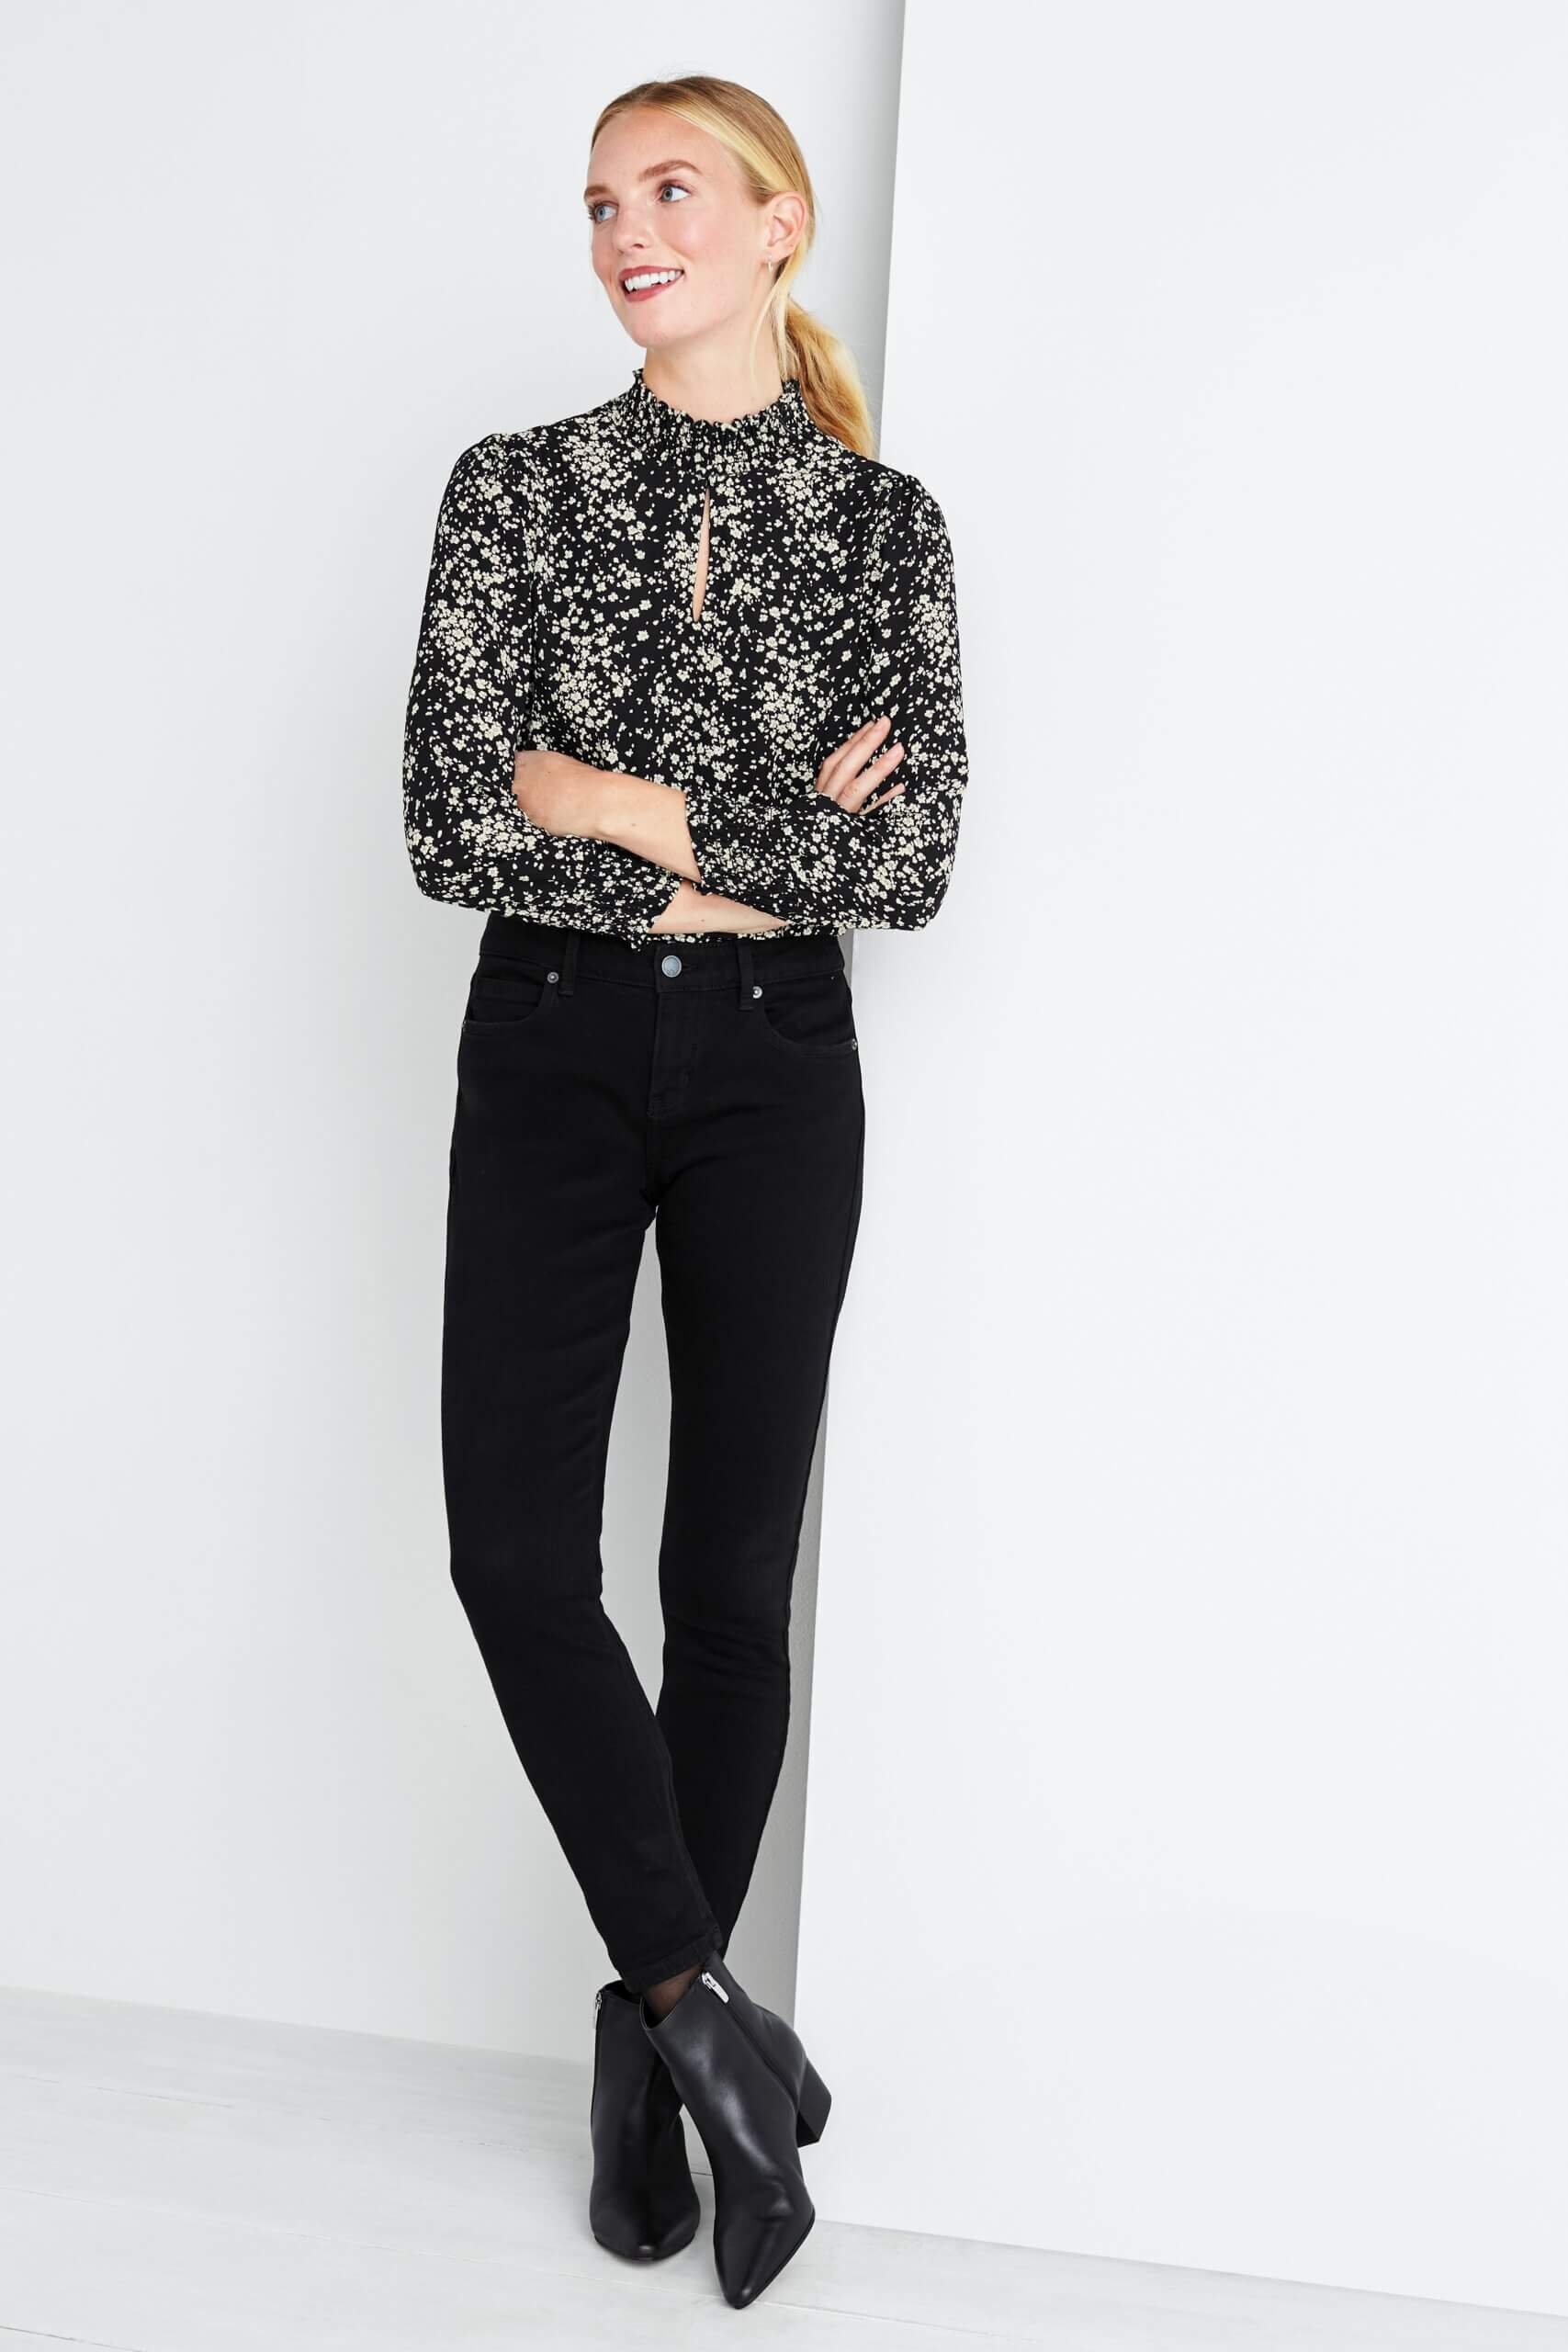 Stitch Fix women's model wearing black tucked in blouse, black skinny jeans and heeled black booties. 